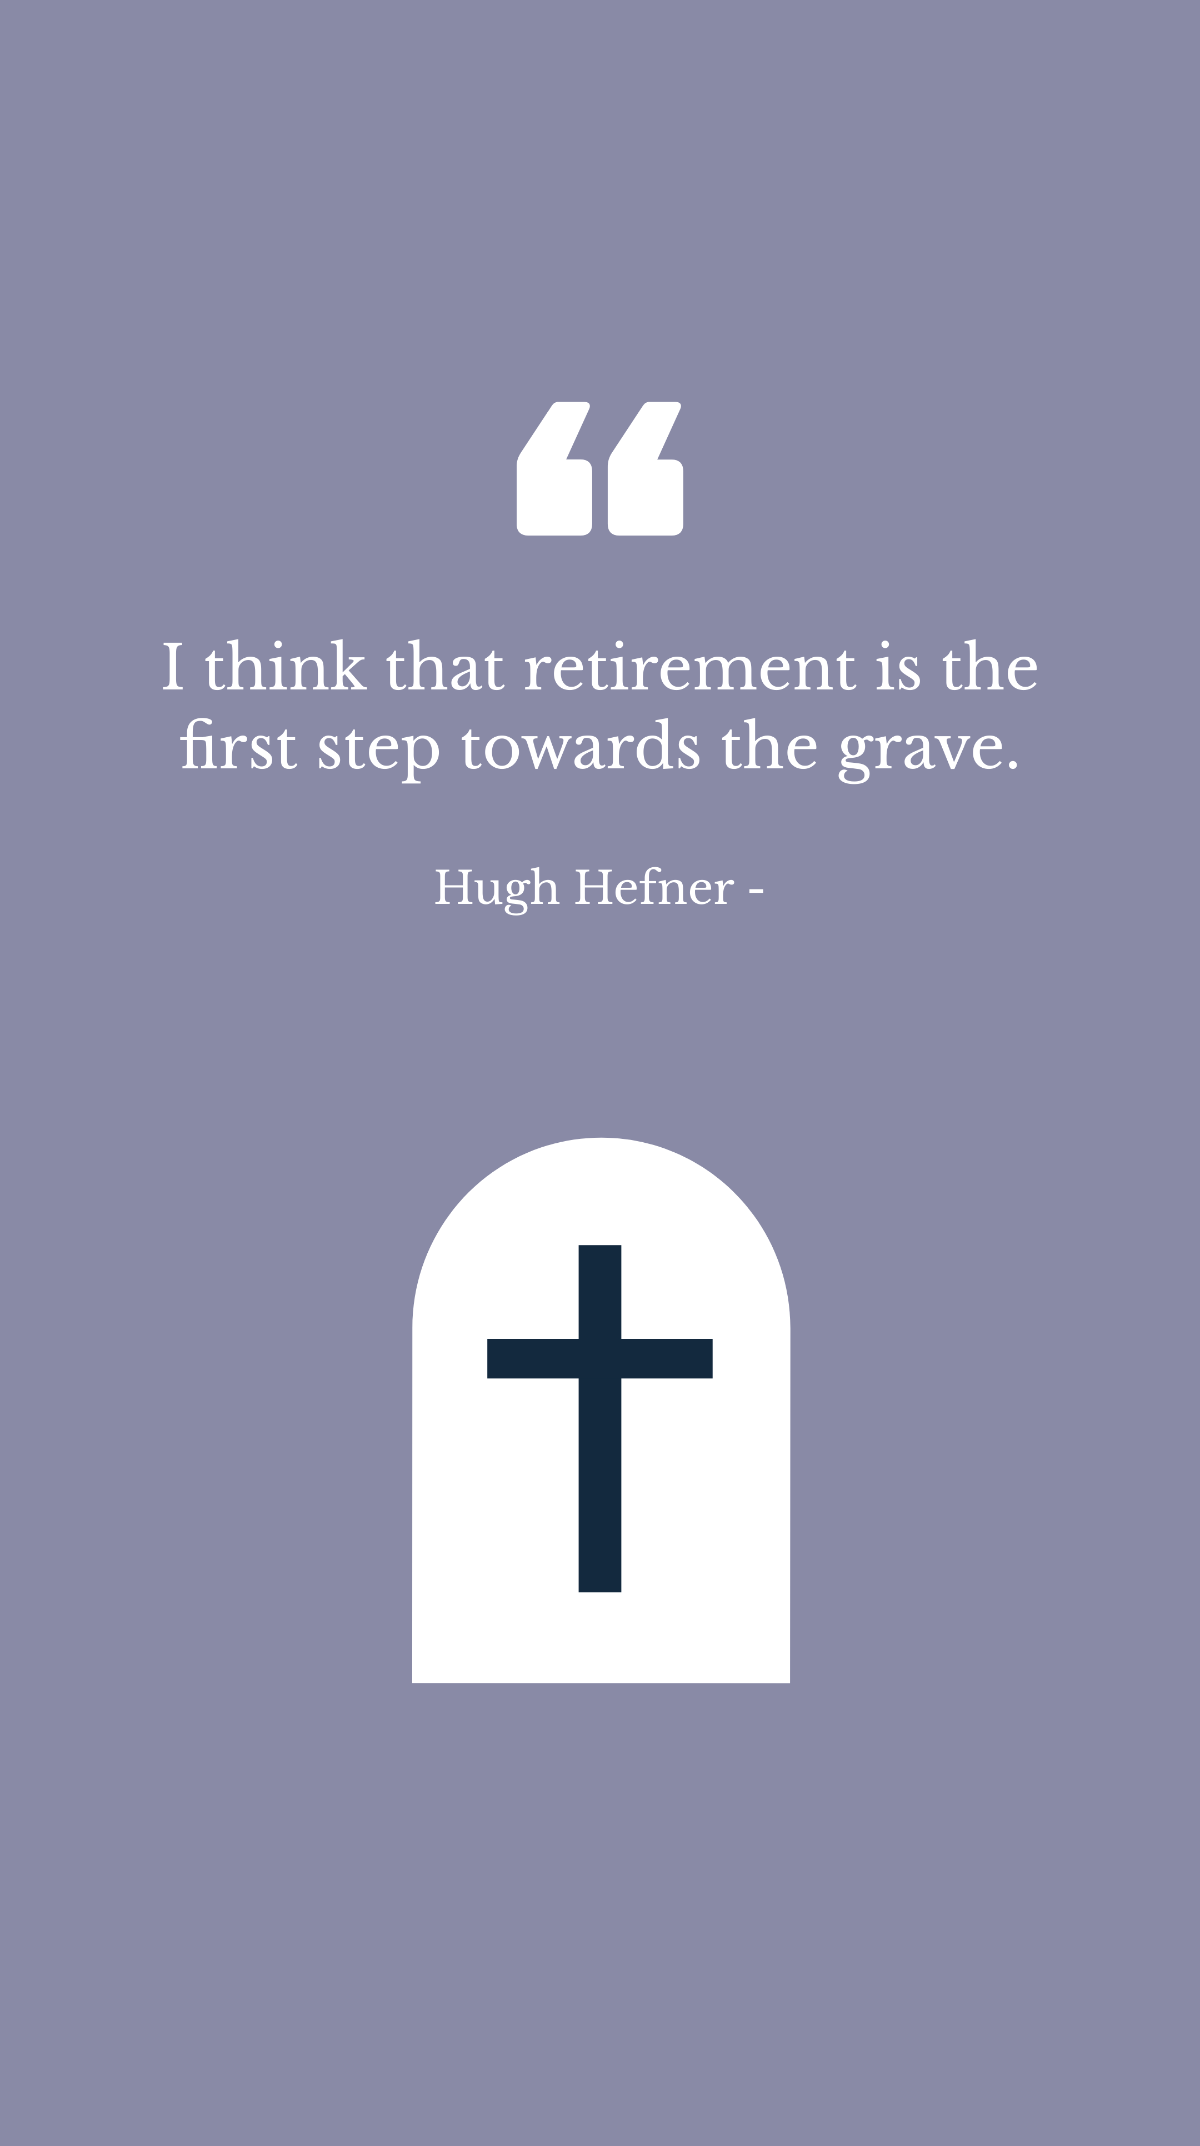 Free Hugh Hefner - I think that retirement is the first step towards the grave. Template